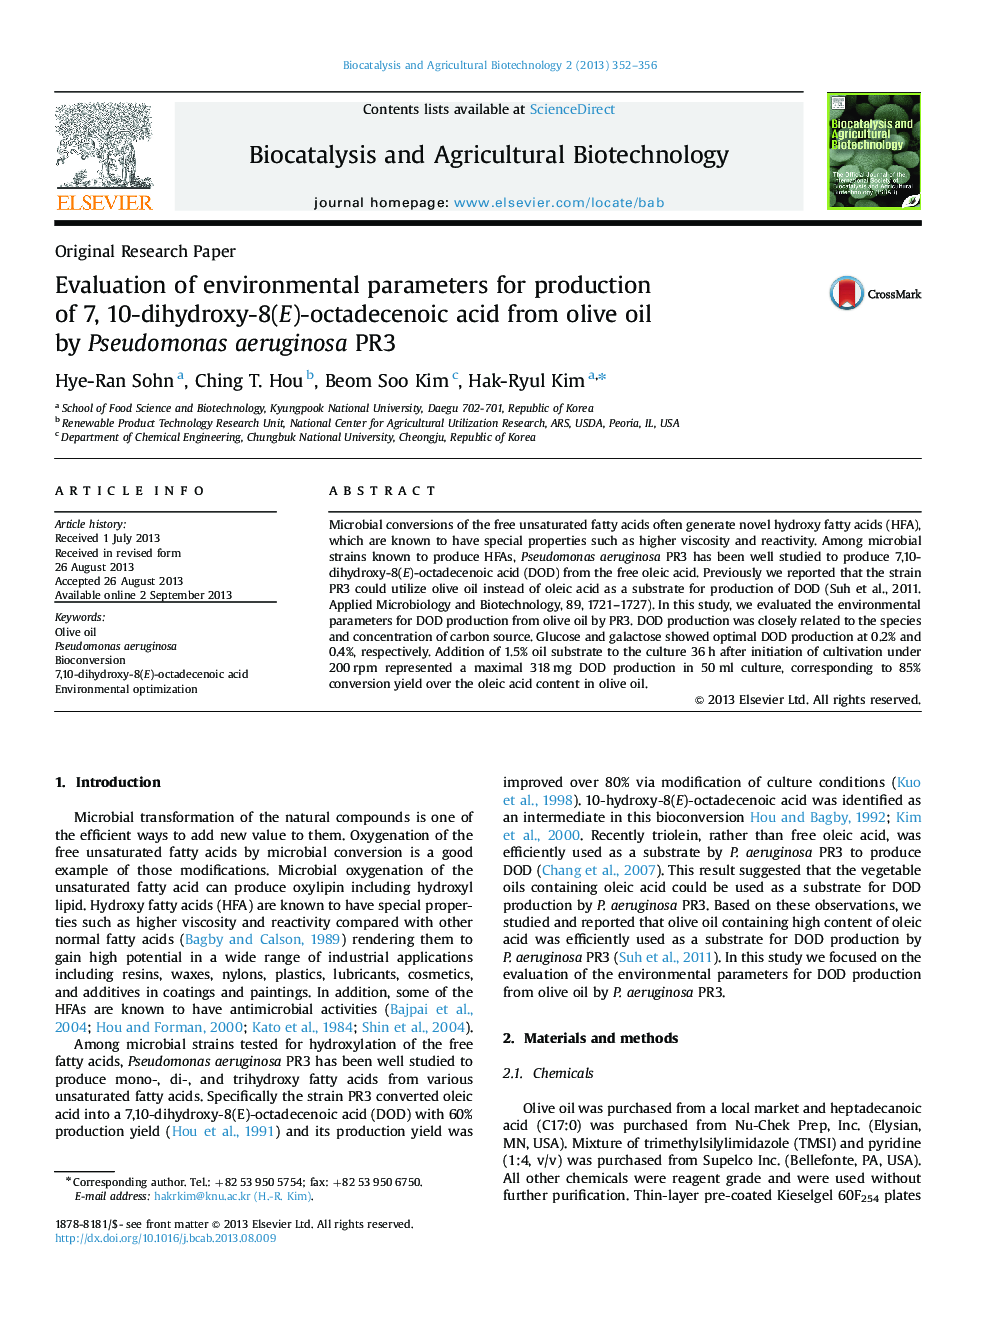 Evaluation of environmental parameters for production of 7, 10-dihydroxy-8(E)-octadecenoic acid from olive oil by Pseudomonas aeruginosa PR3